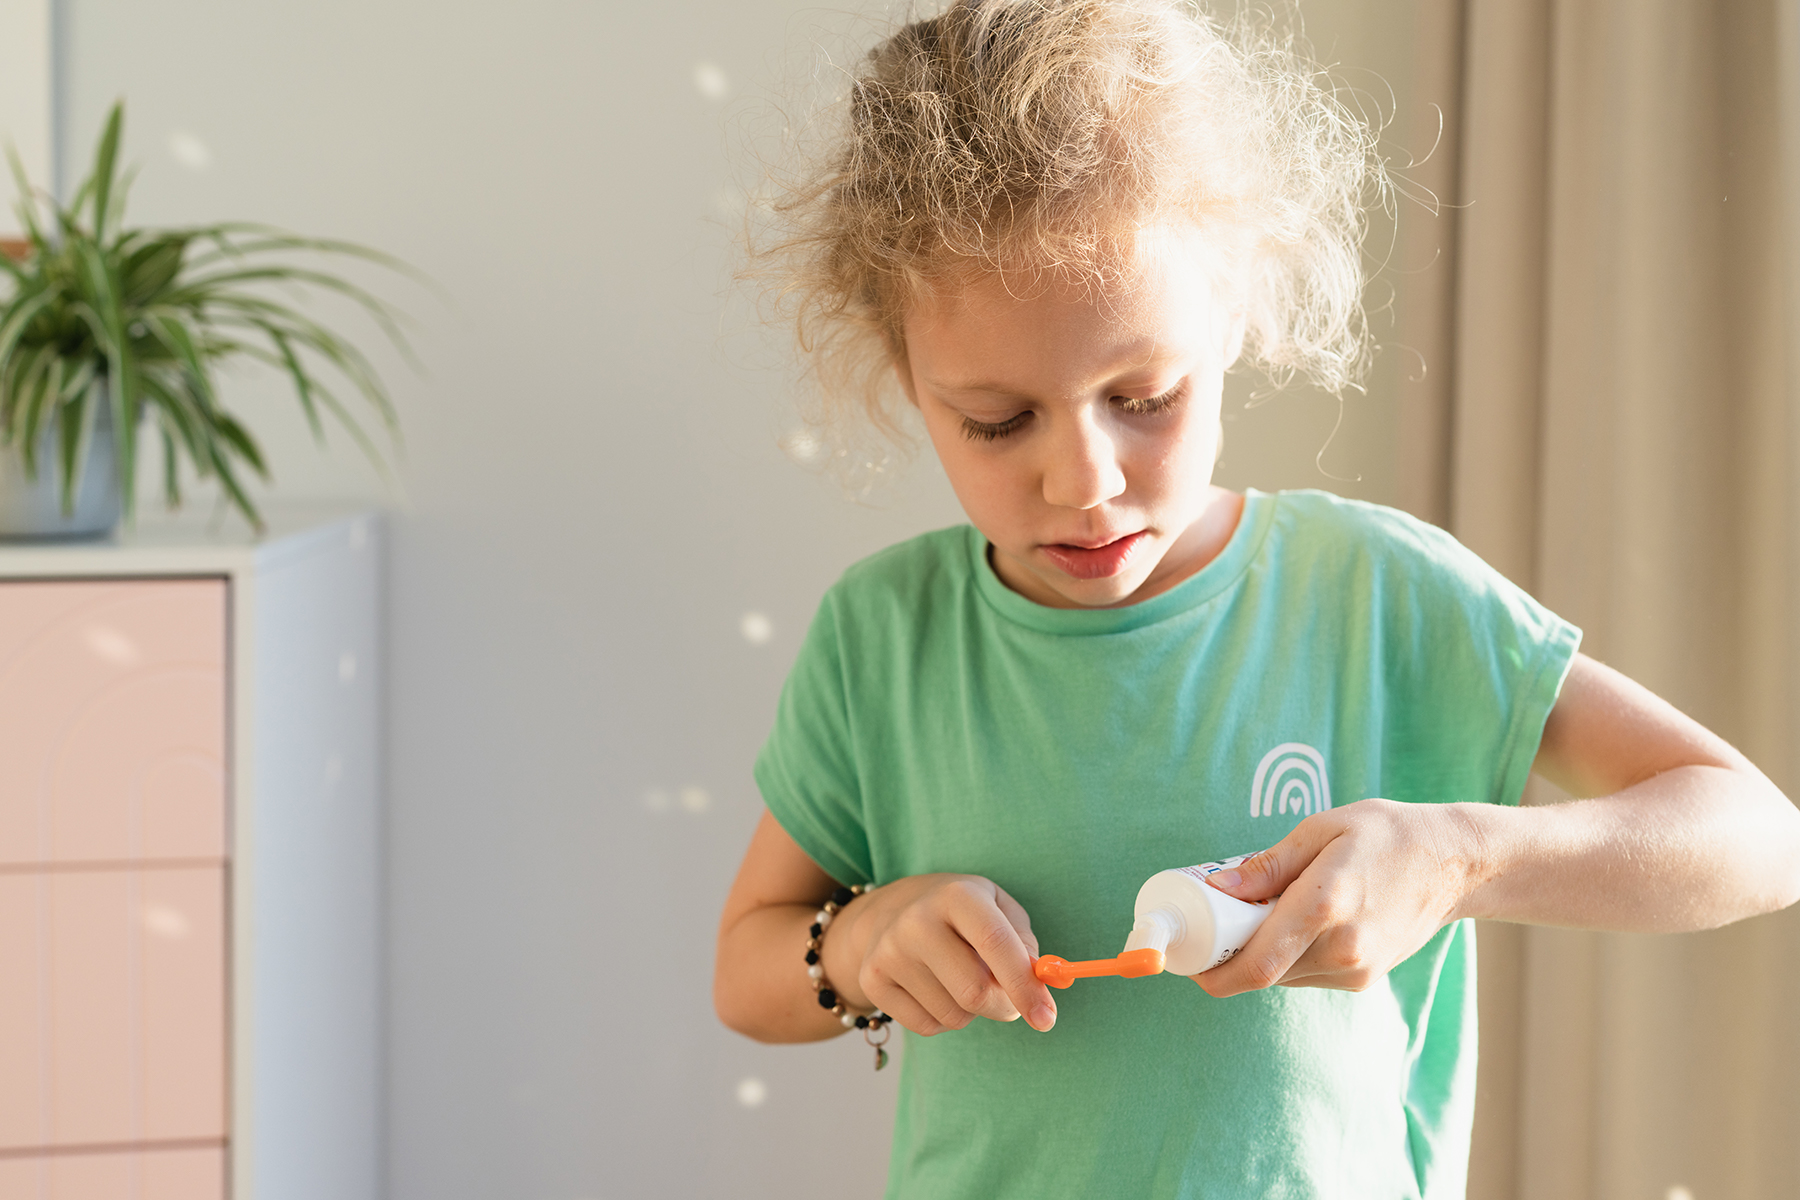 A child puts toothpaste on a toothbrush